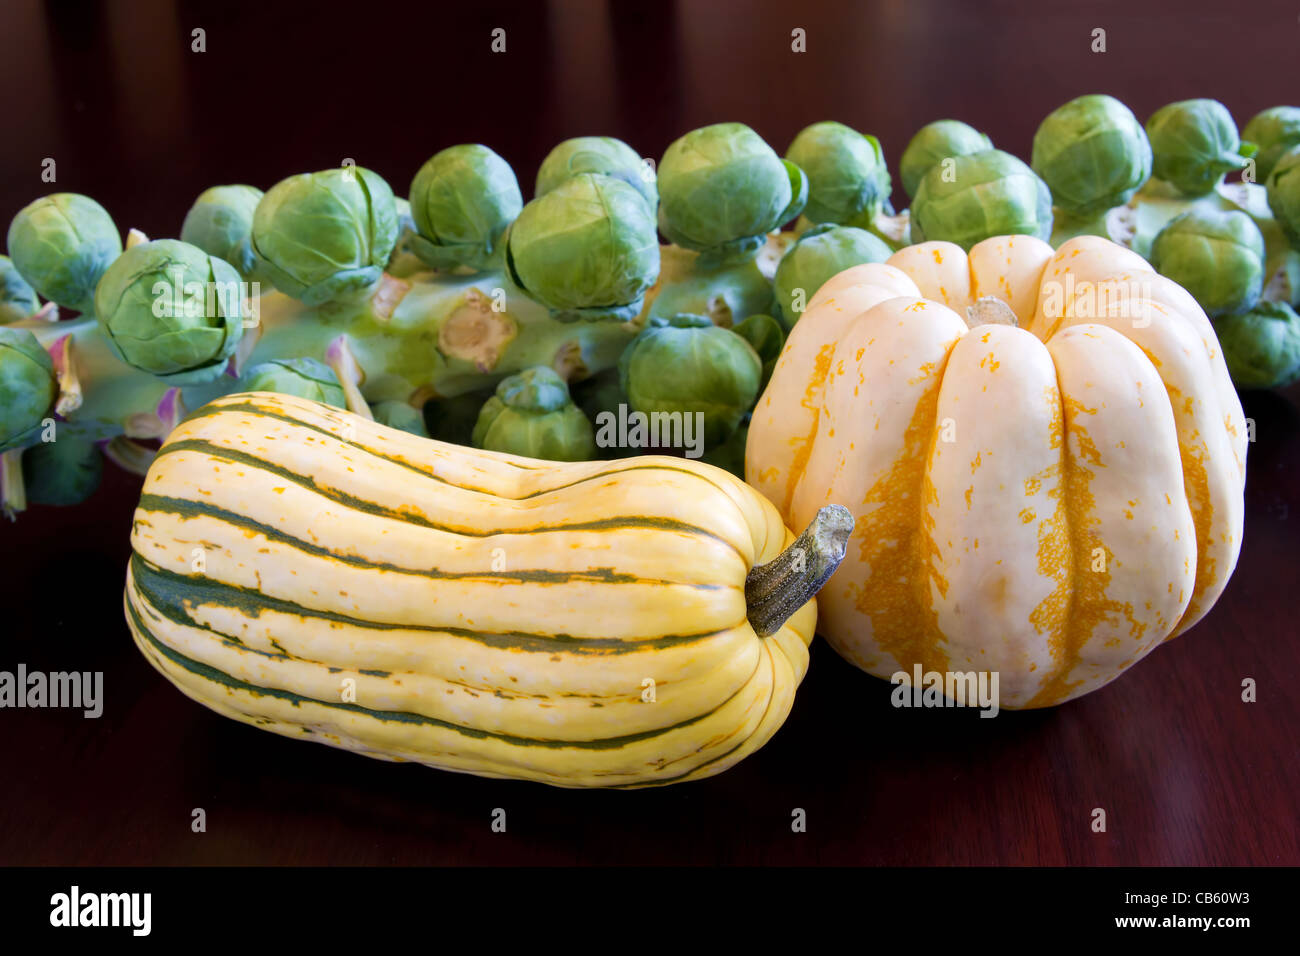 Brussels Sprouts with Sweet Dumpling and Delicata Squash Still Life Stock Photo